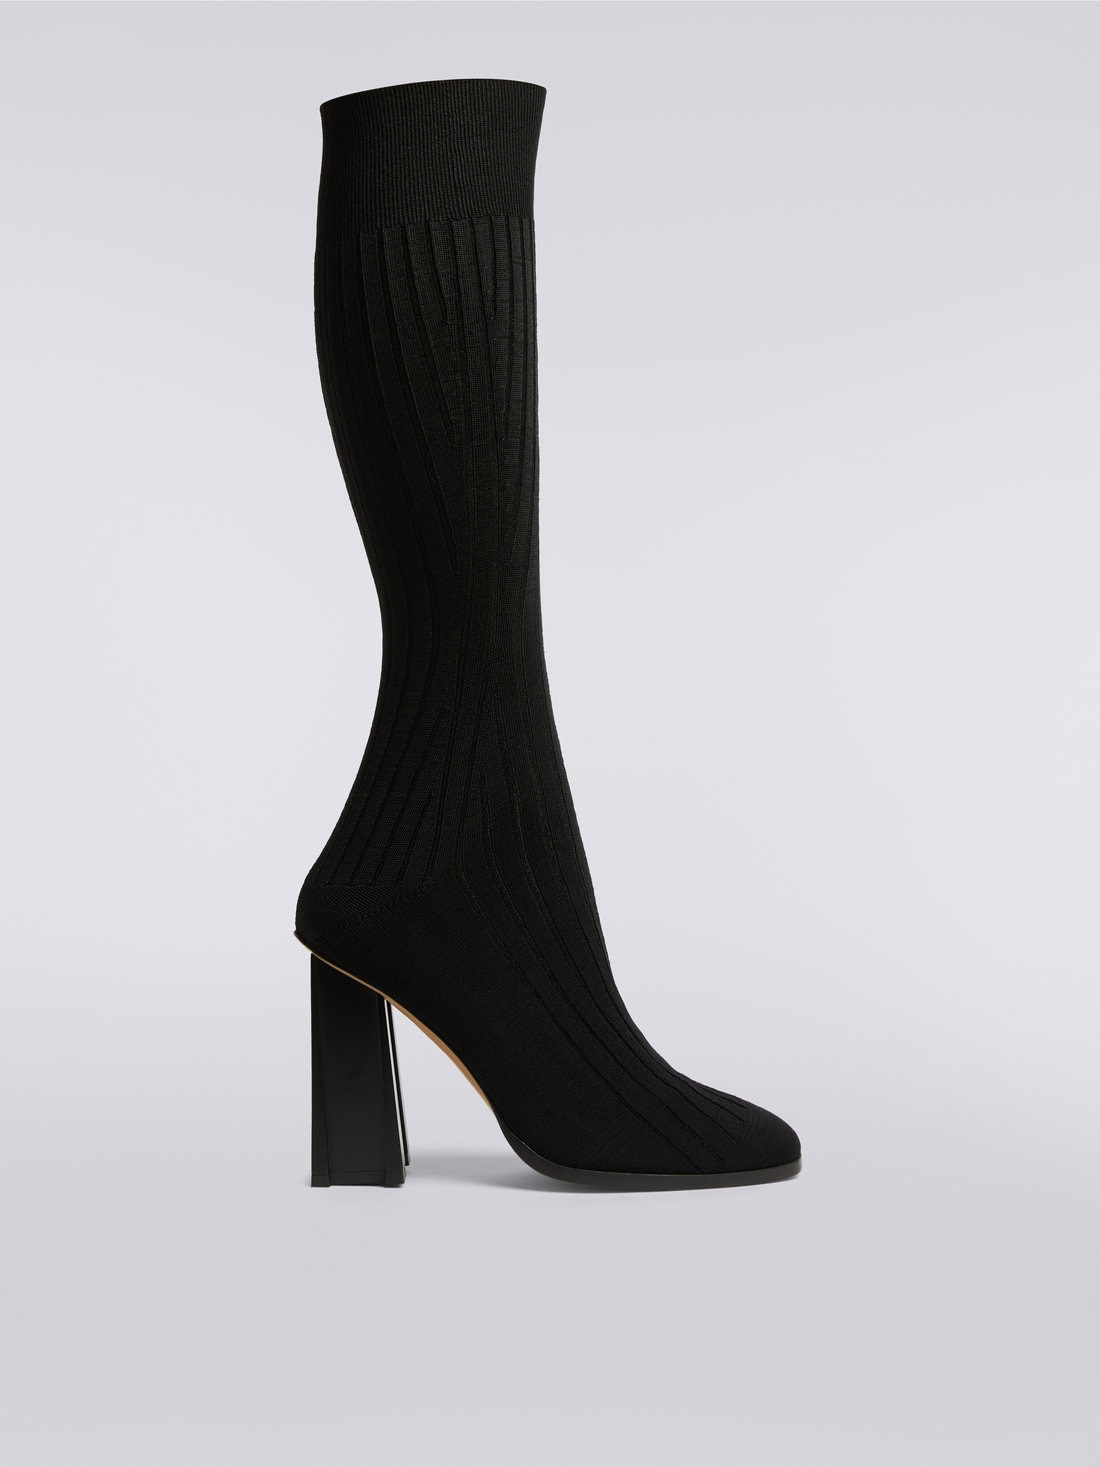 High-heel knit boots , Black    - AS23WY04BK028R93911 - 0